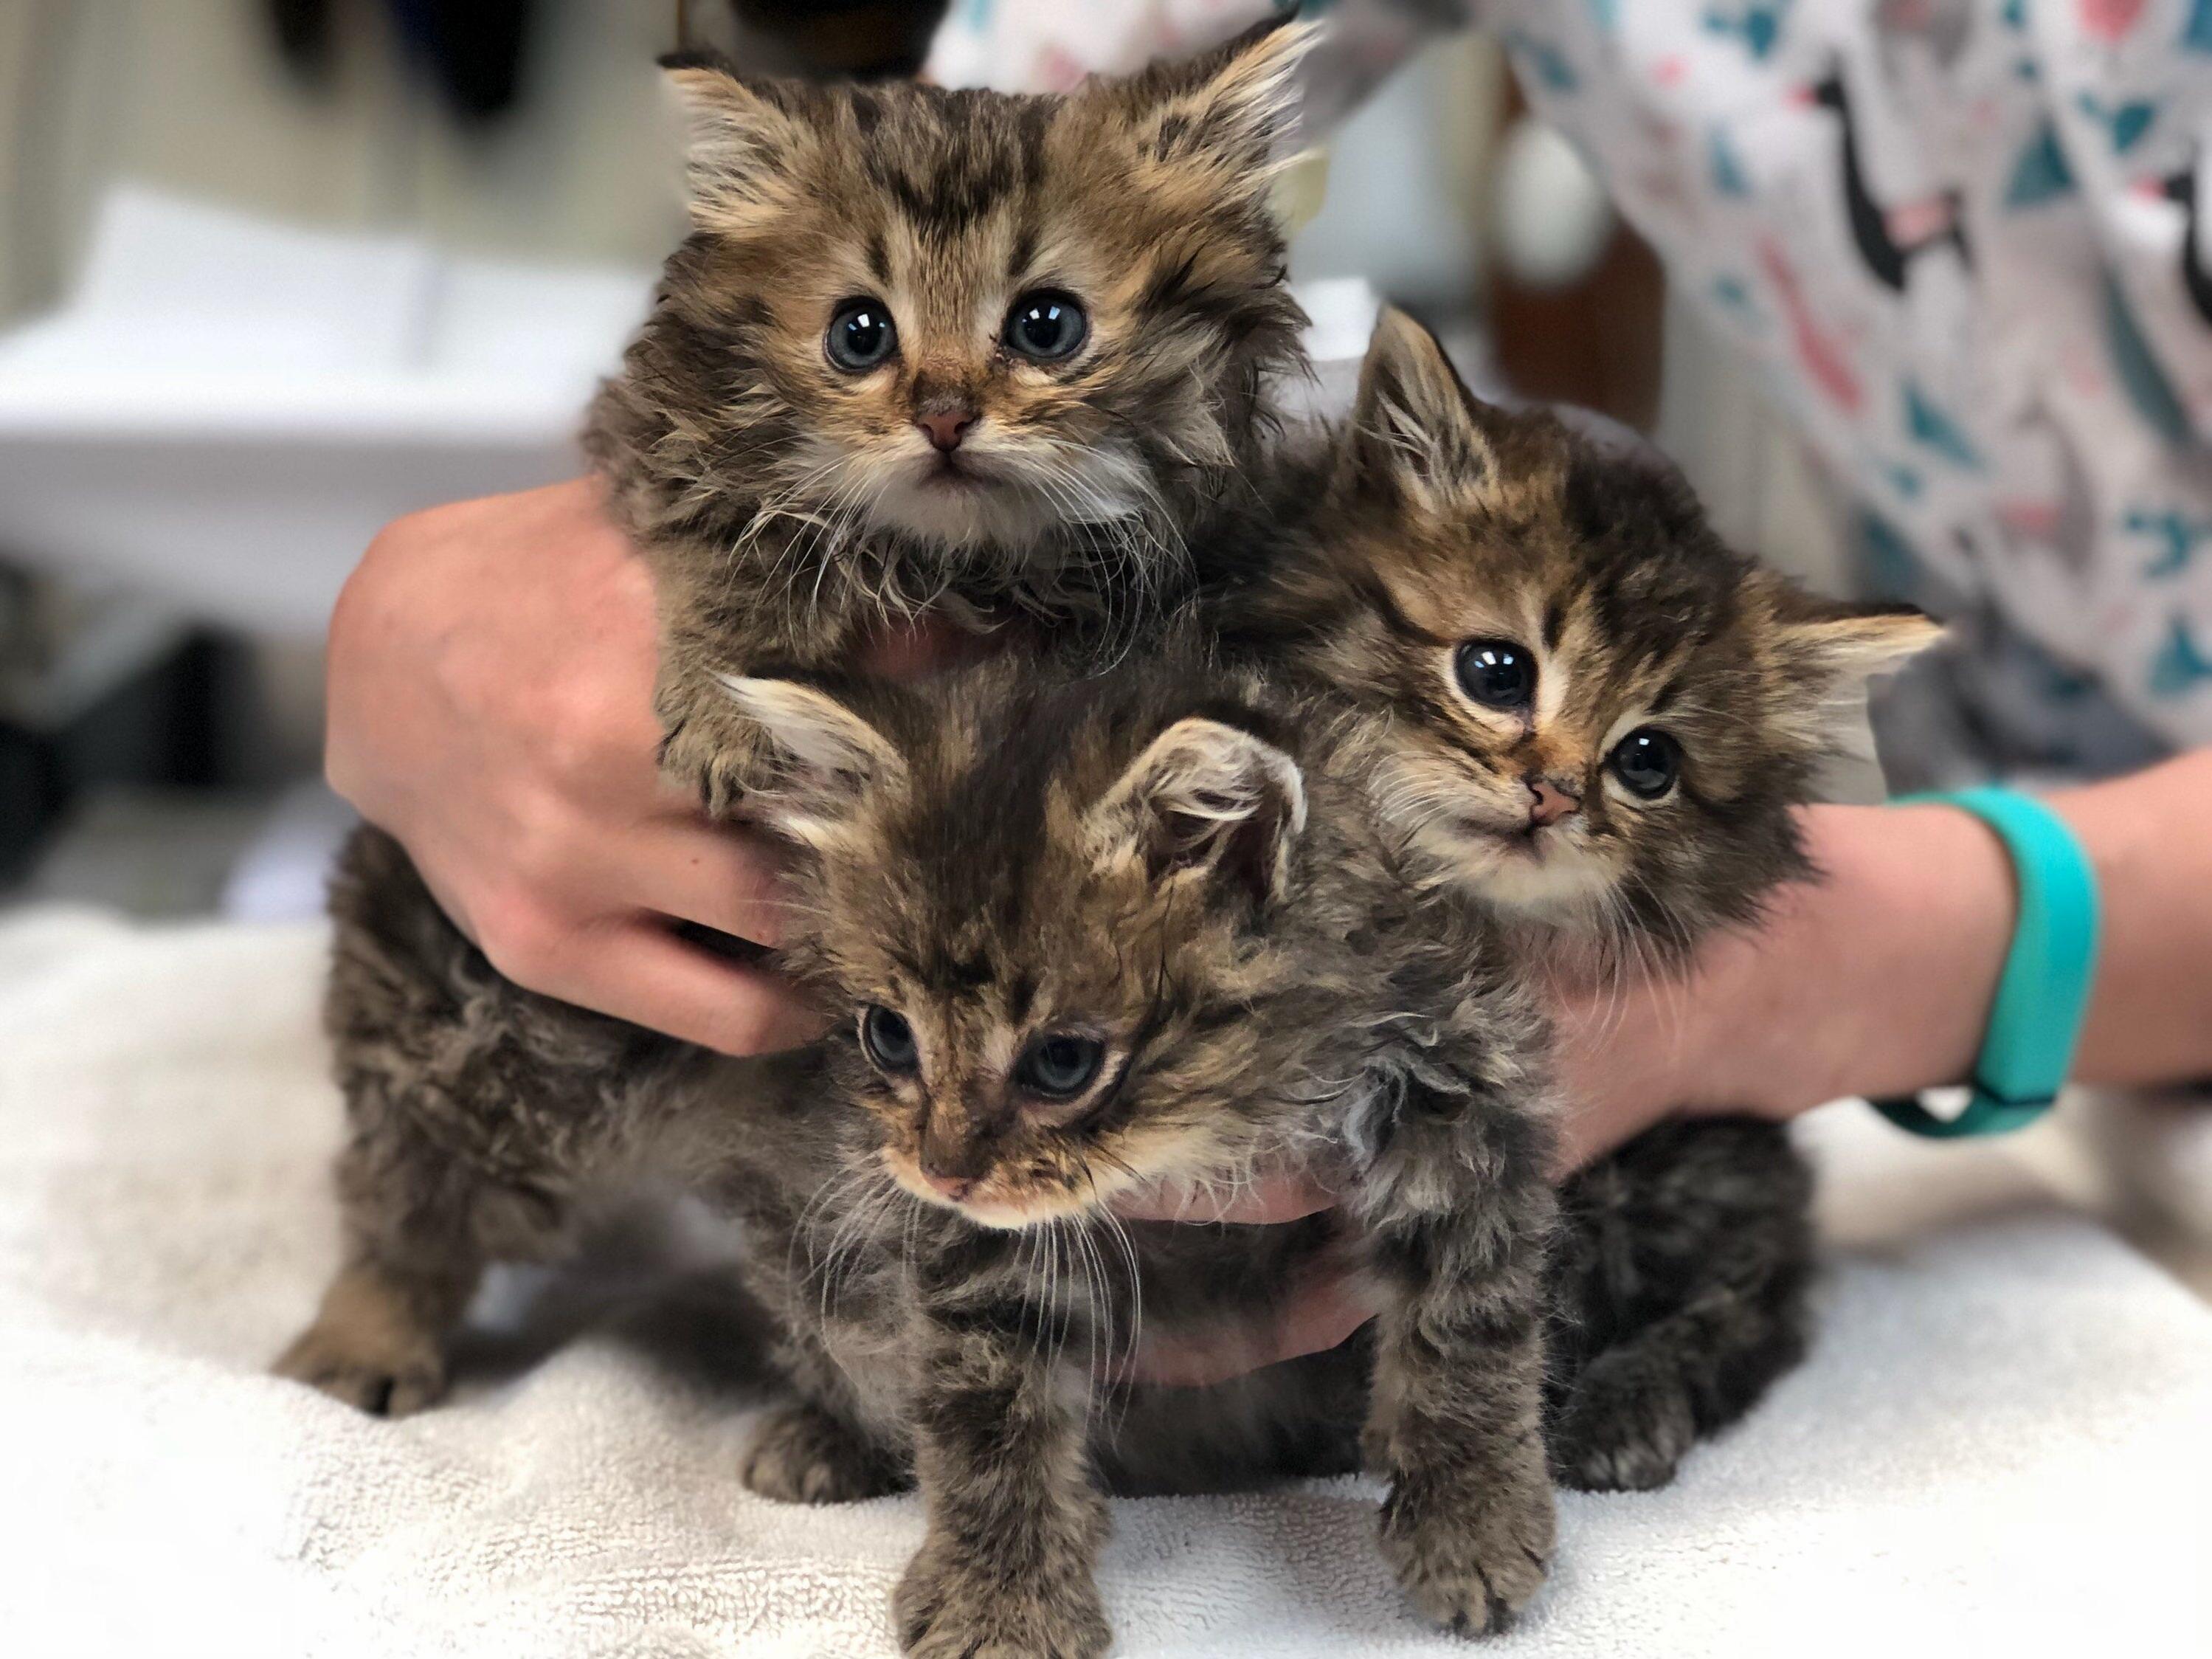 These kittens were dropped off at the animal hospital my sister works at. how do i not take one home with me